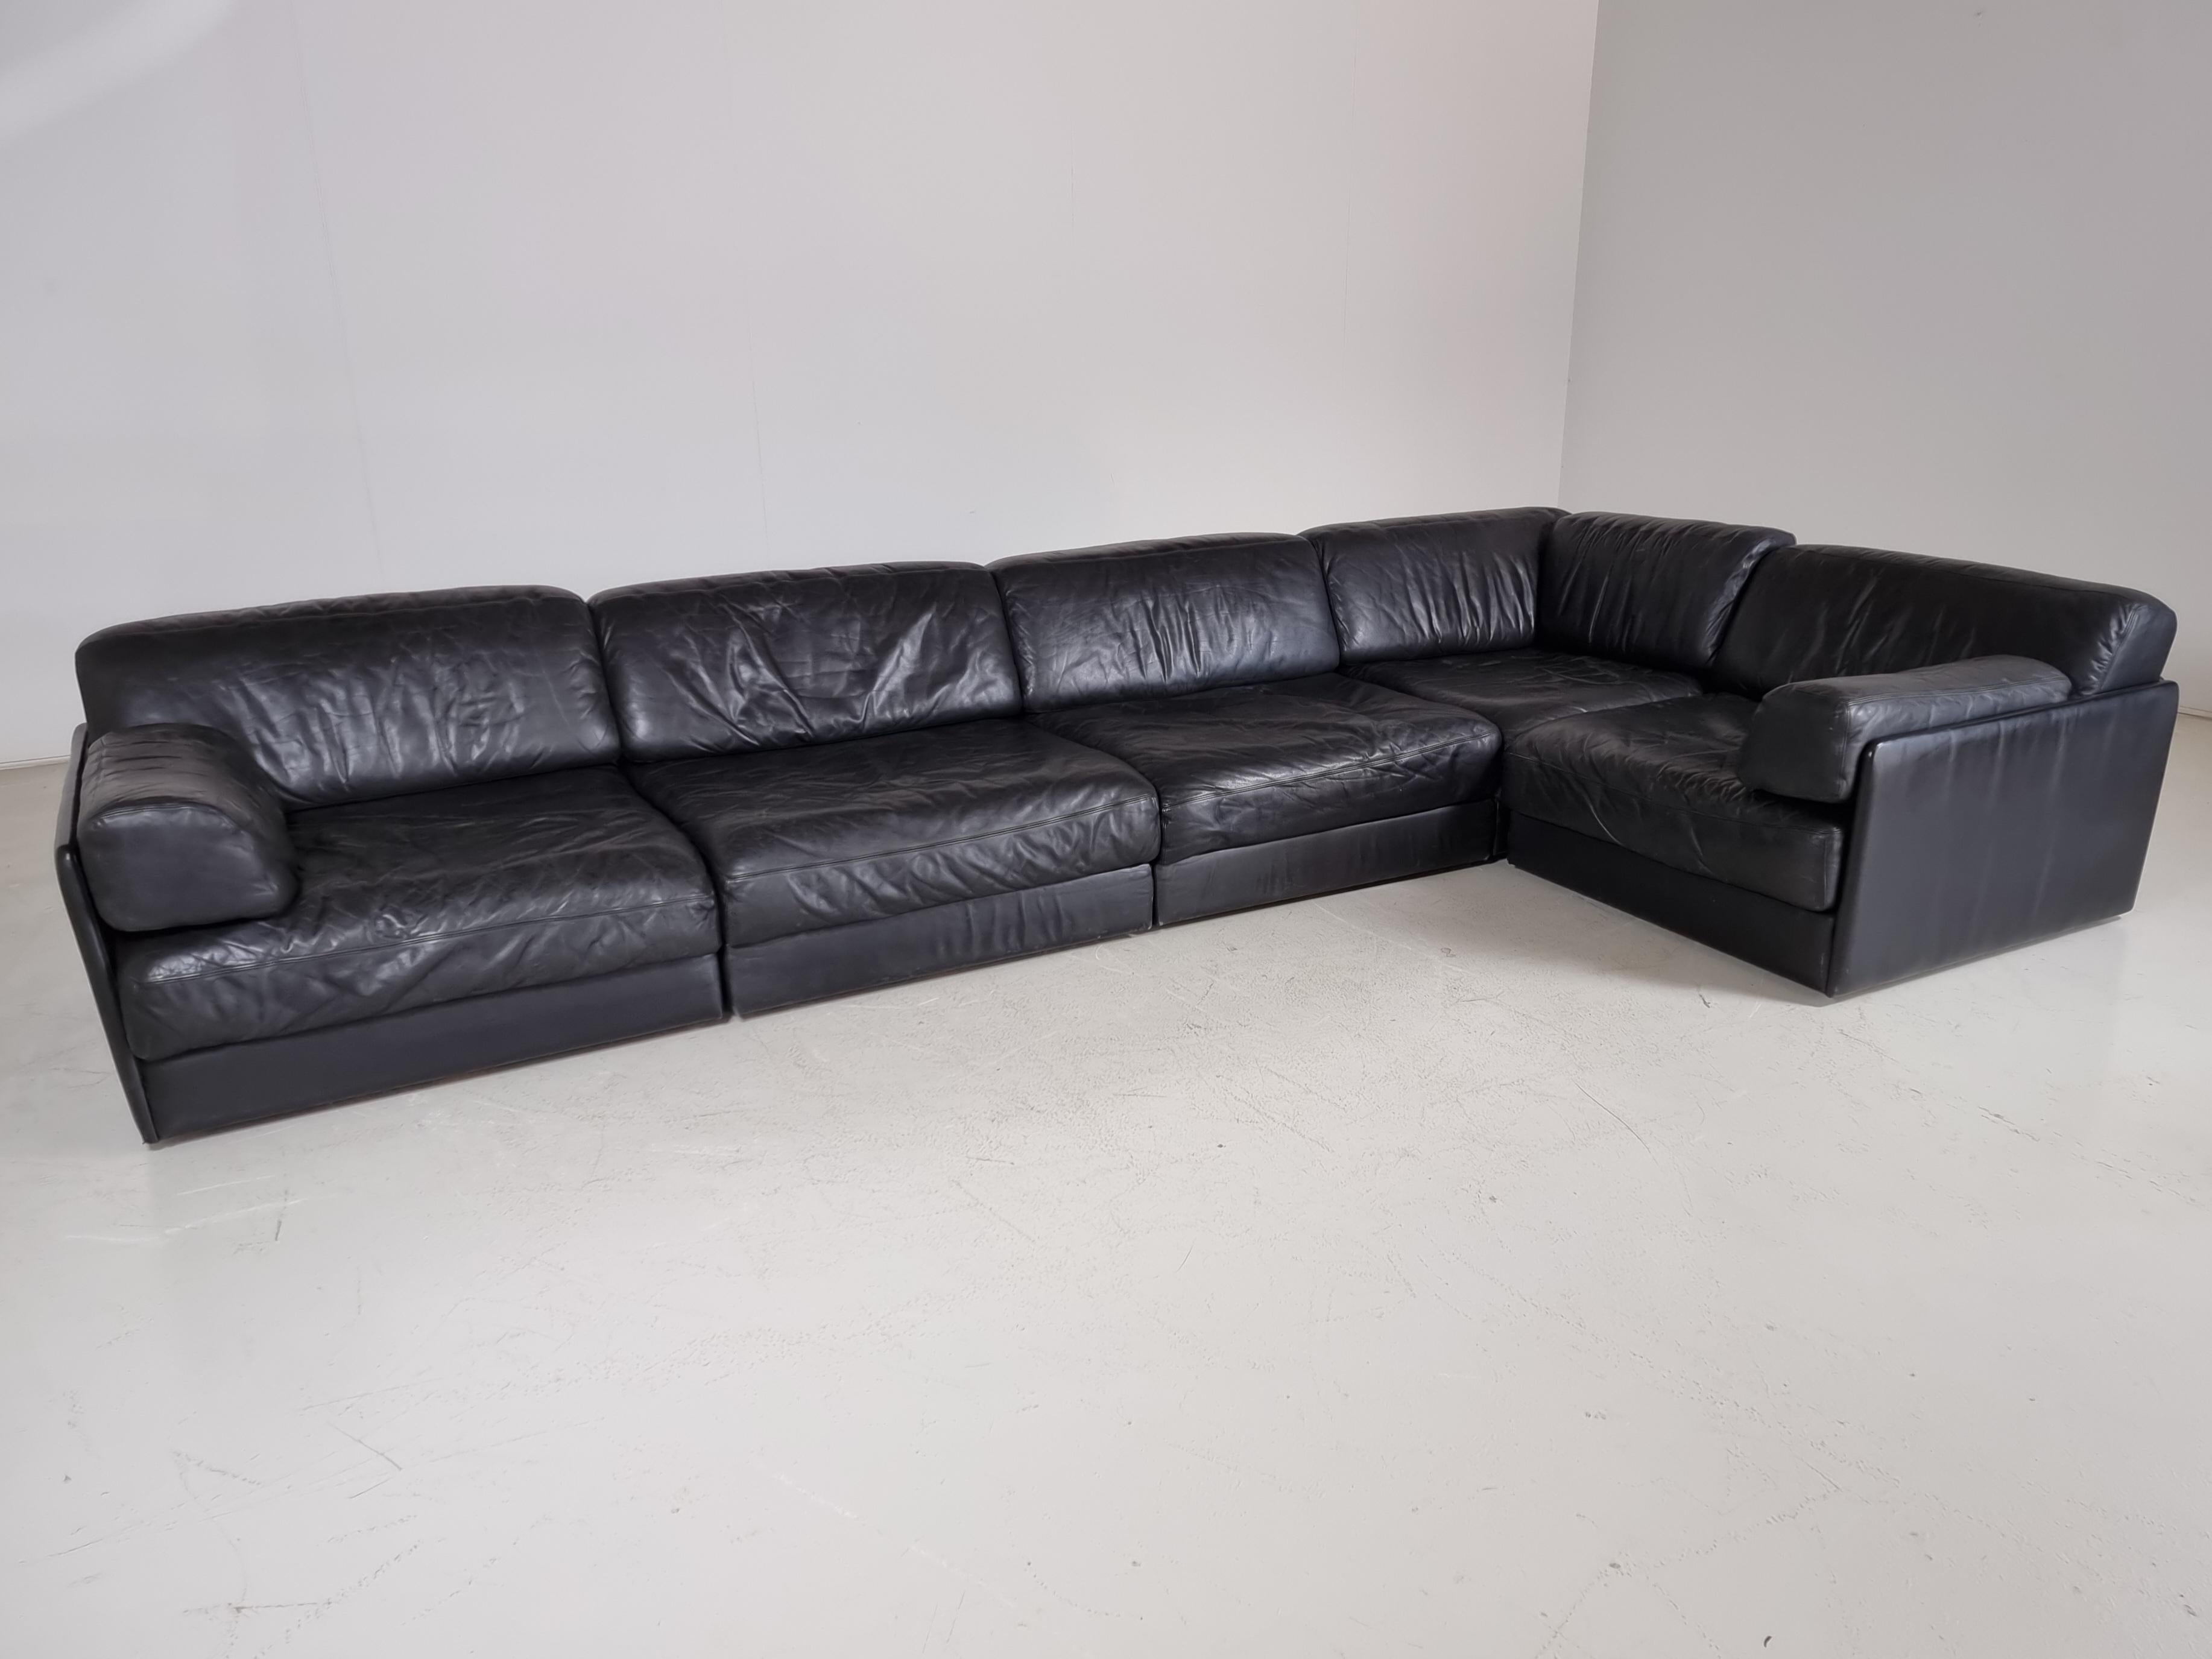 Beautiful 5-piece black leather modular sofa  by De Sede from the 1970s. The sofa can be converted into a guest bed in just a few simple steps. Extremely comfortable with a nice patina. Many different settings are possible.

Beautiful patina.